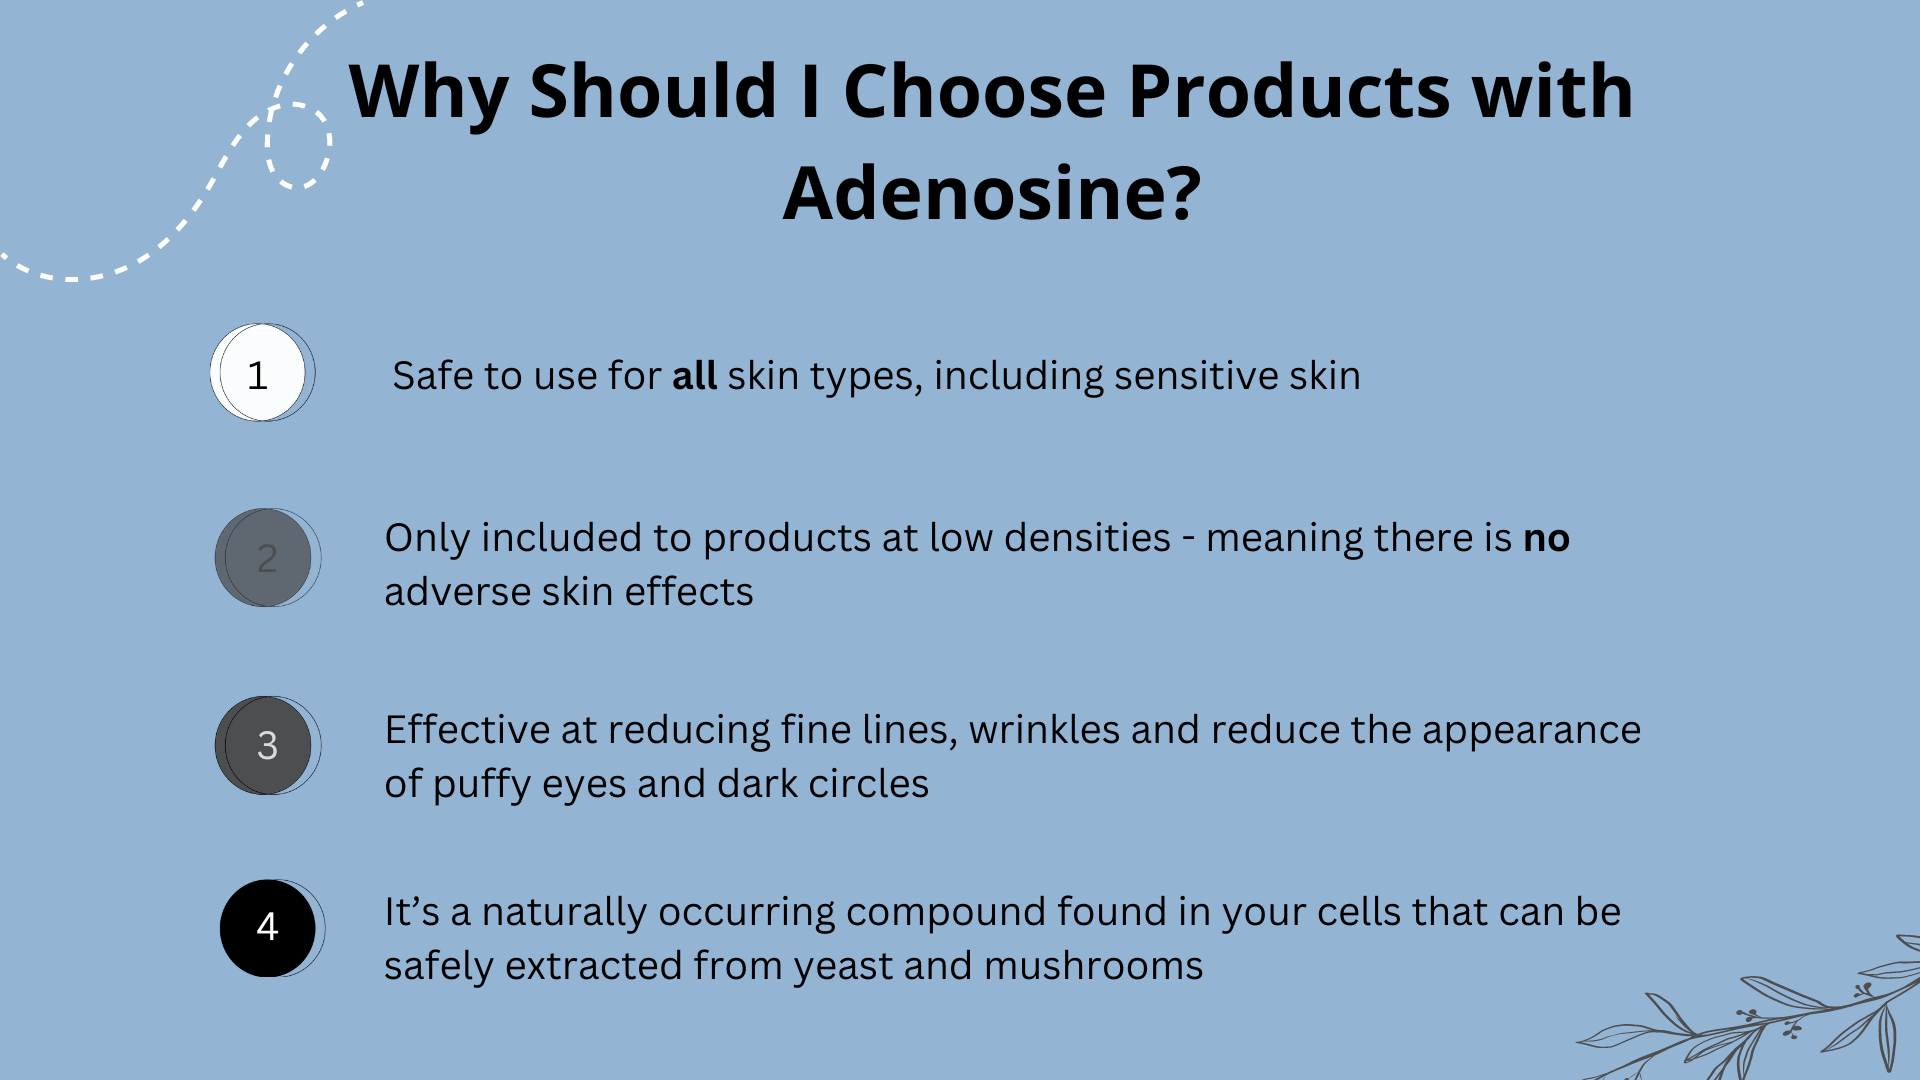 Why Should I Choose Products With Adenosine